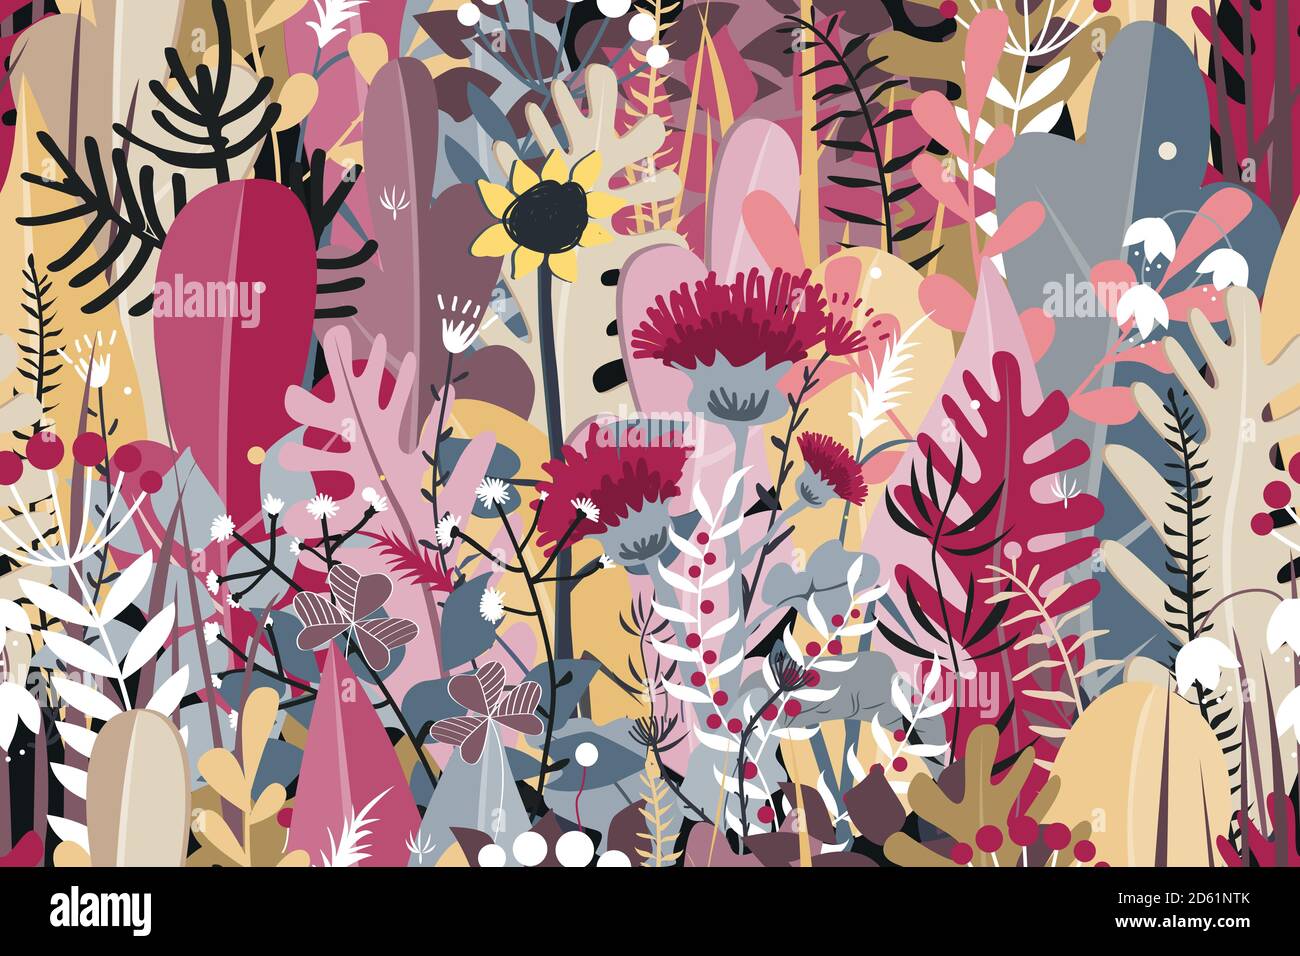 Doodle seamless pattern of stylized autumn flowers, leaves and trees for greeting cards, textile, or banners. Meadow or forest autumn grass Stock Vector